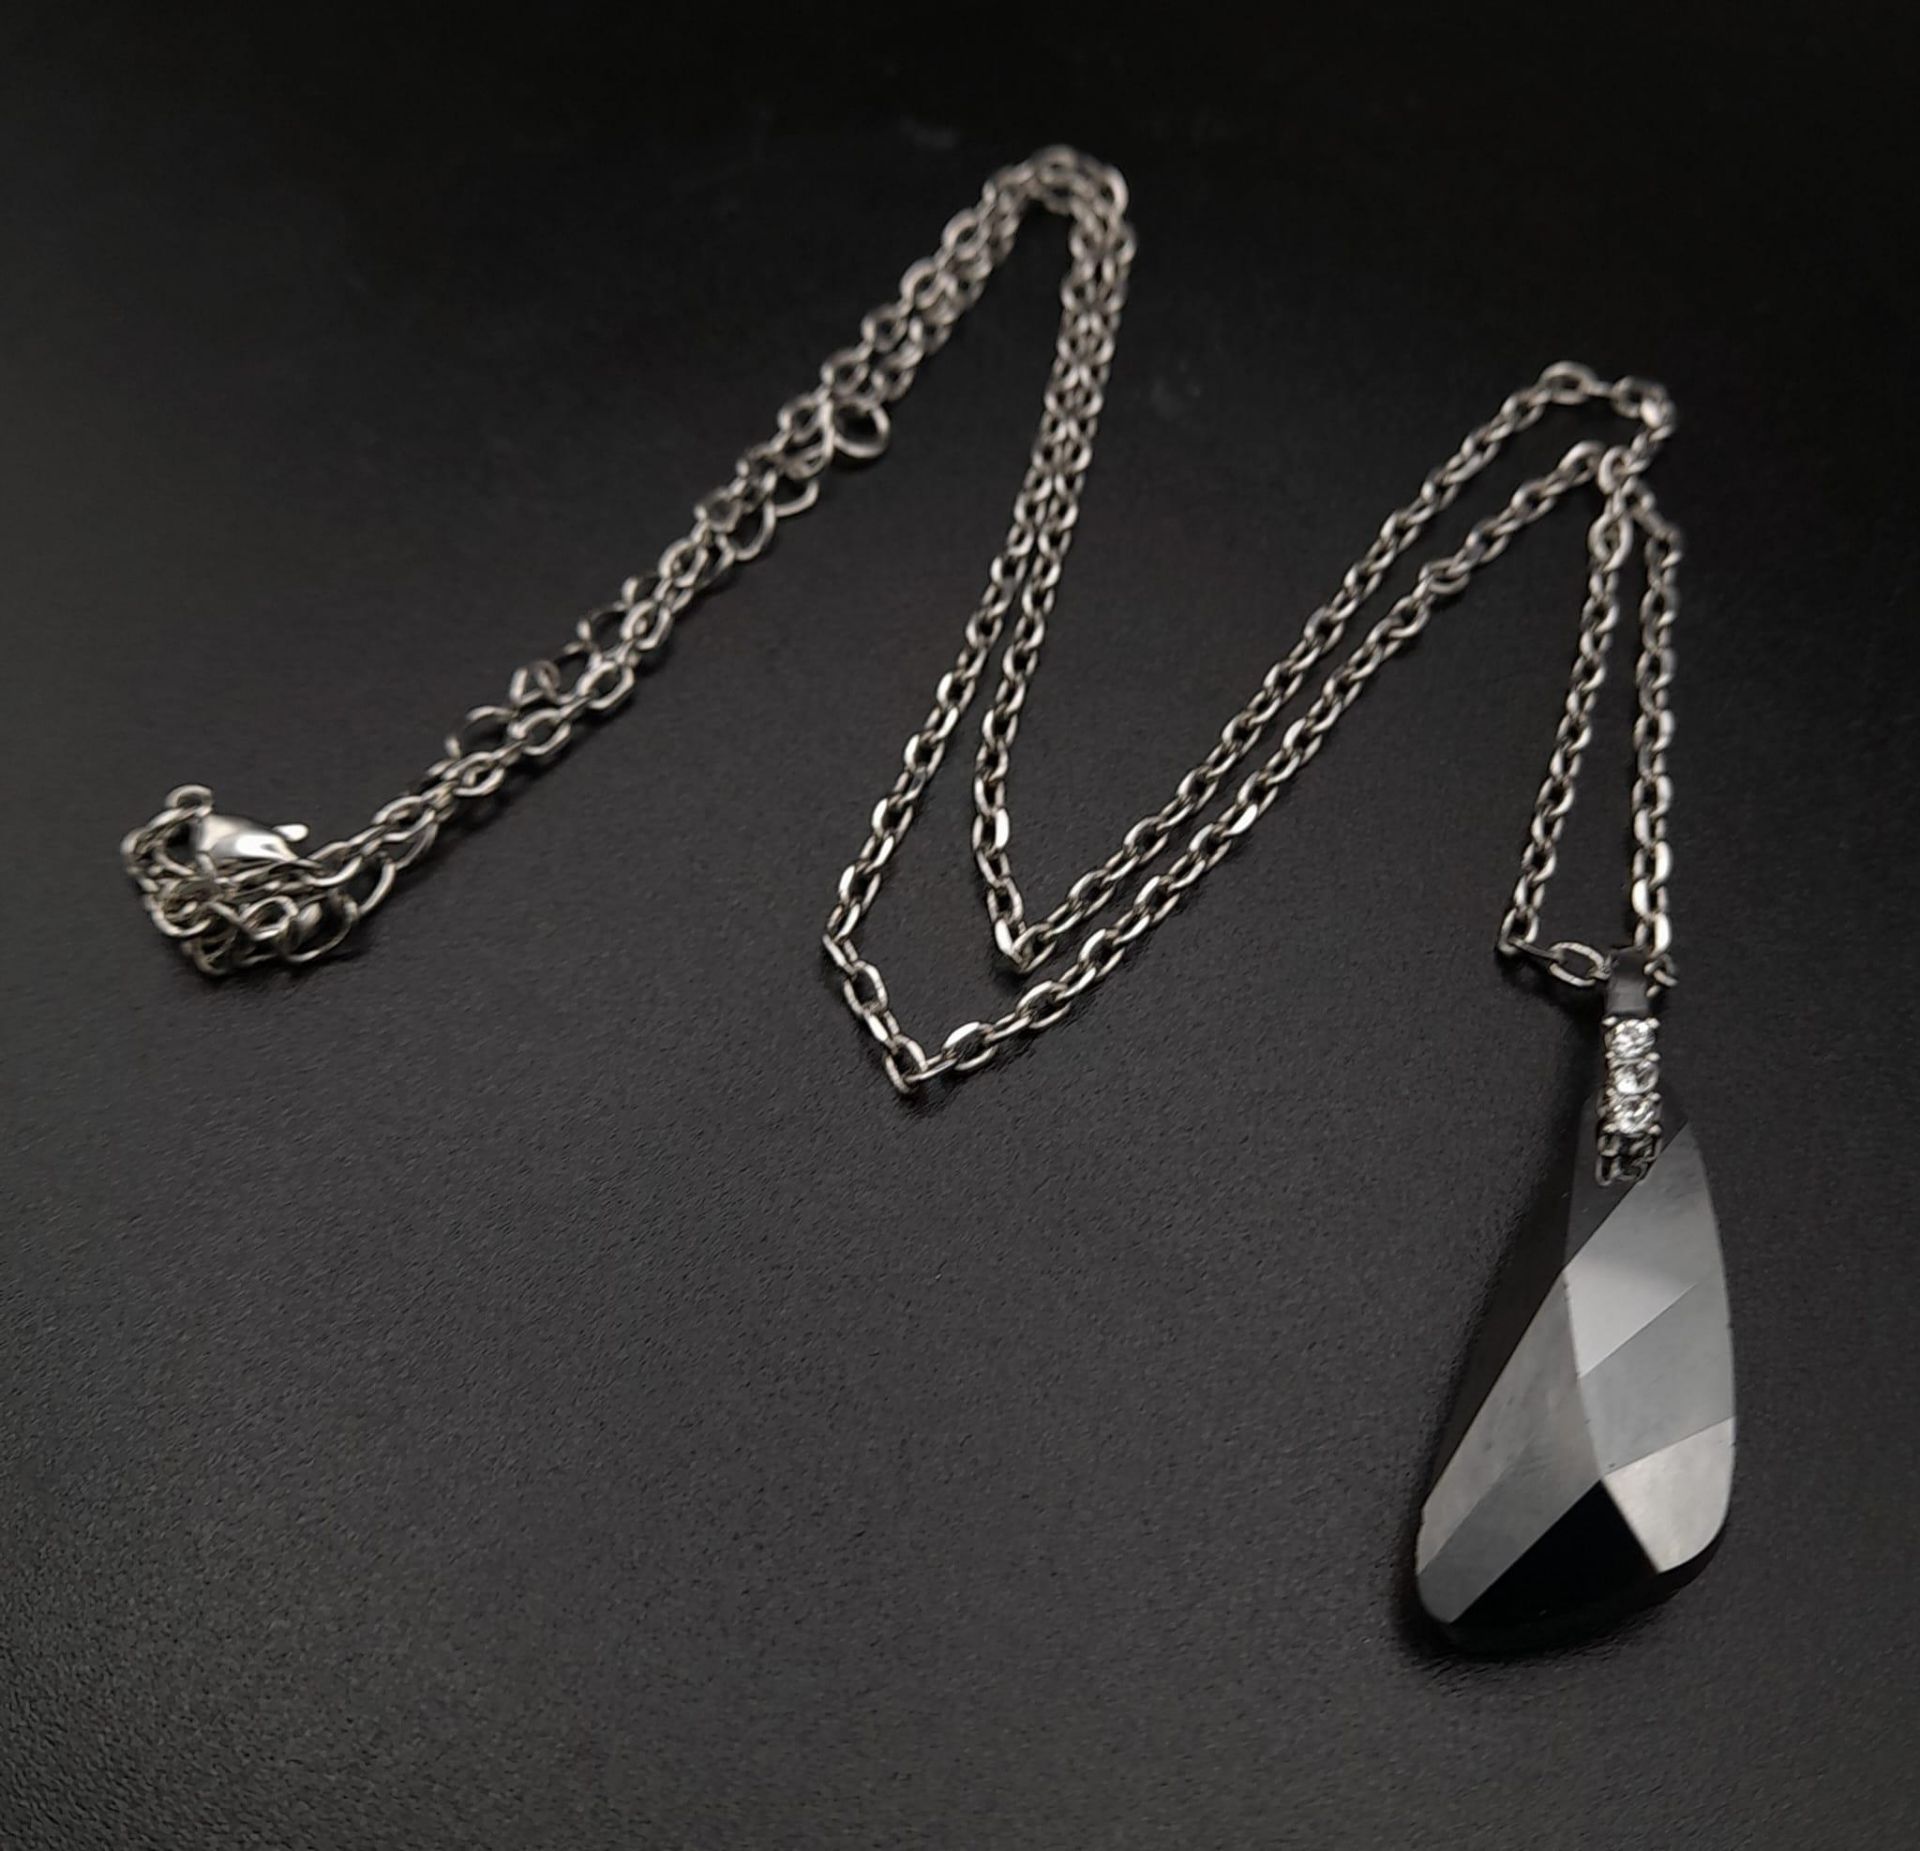 A silver with smoky quartz necklace. Total weight 6.82 grams. Total length 45 cm.